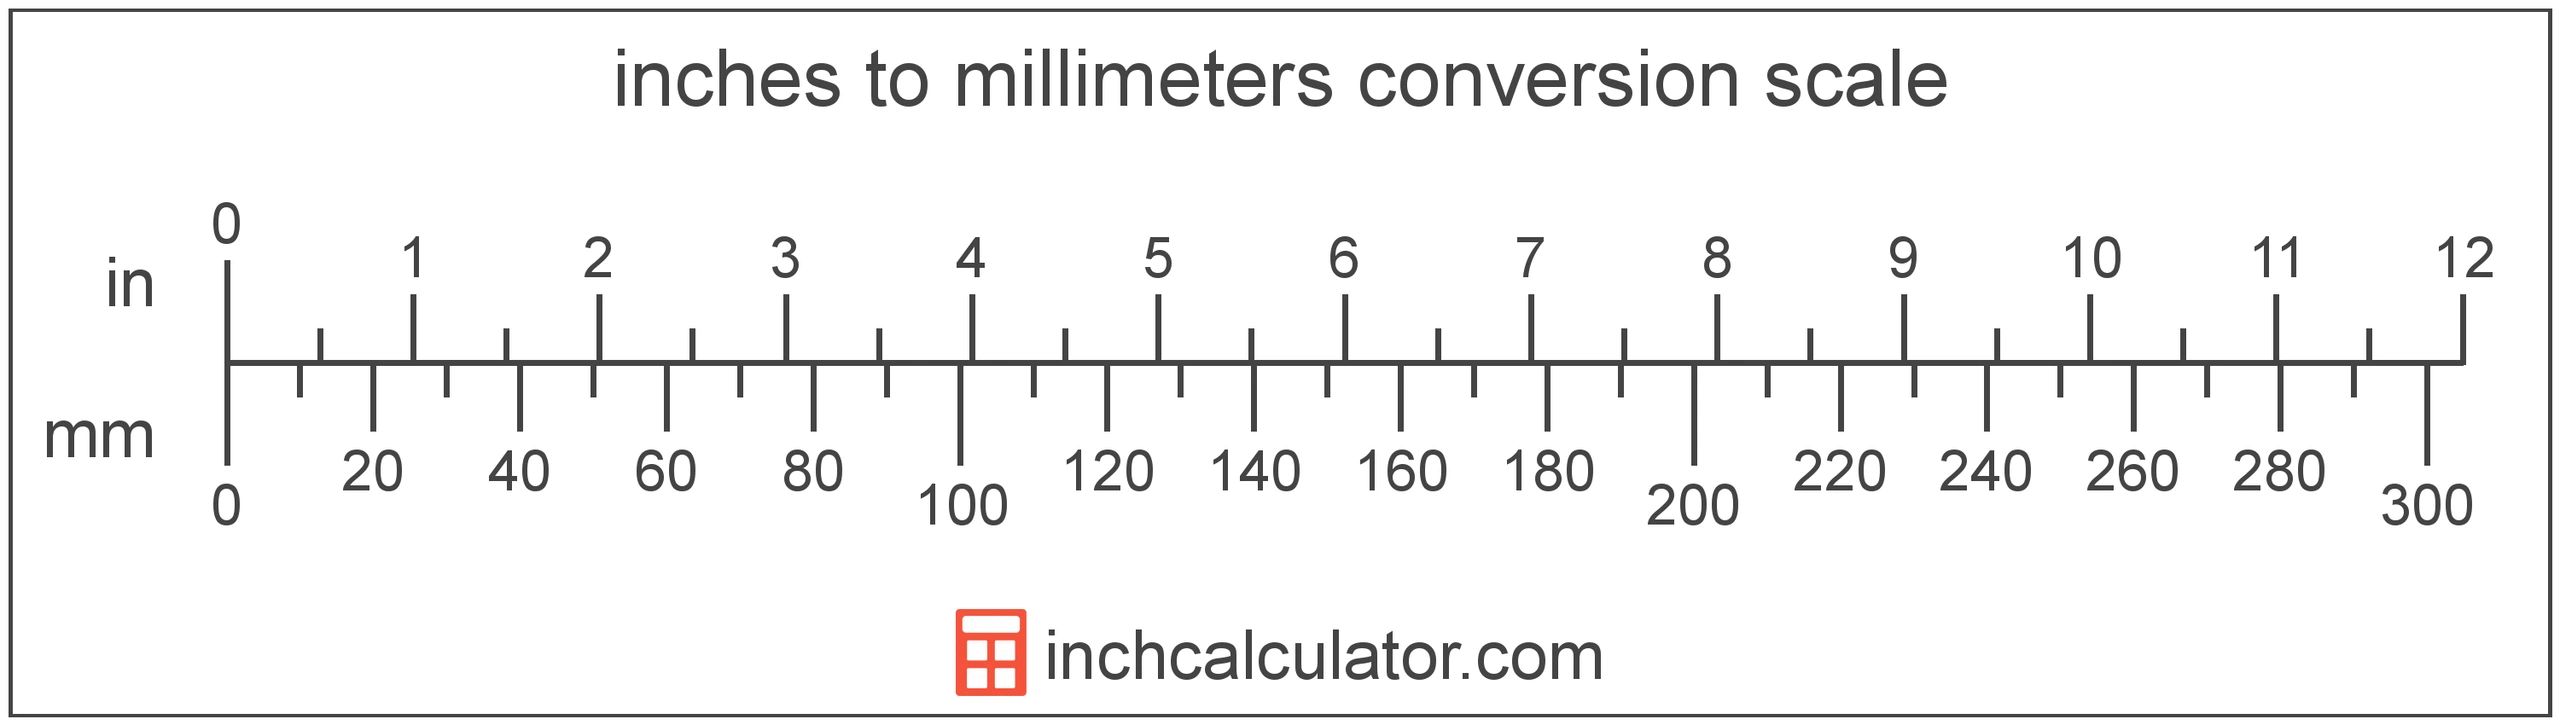 Millimeters to Inches Conversion Ruler